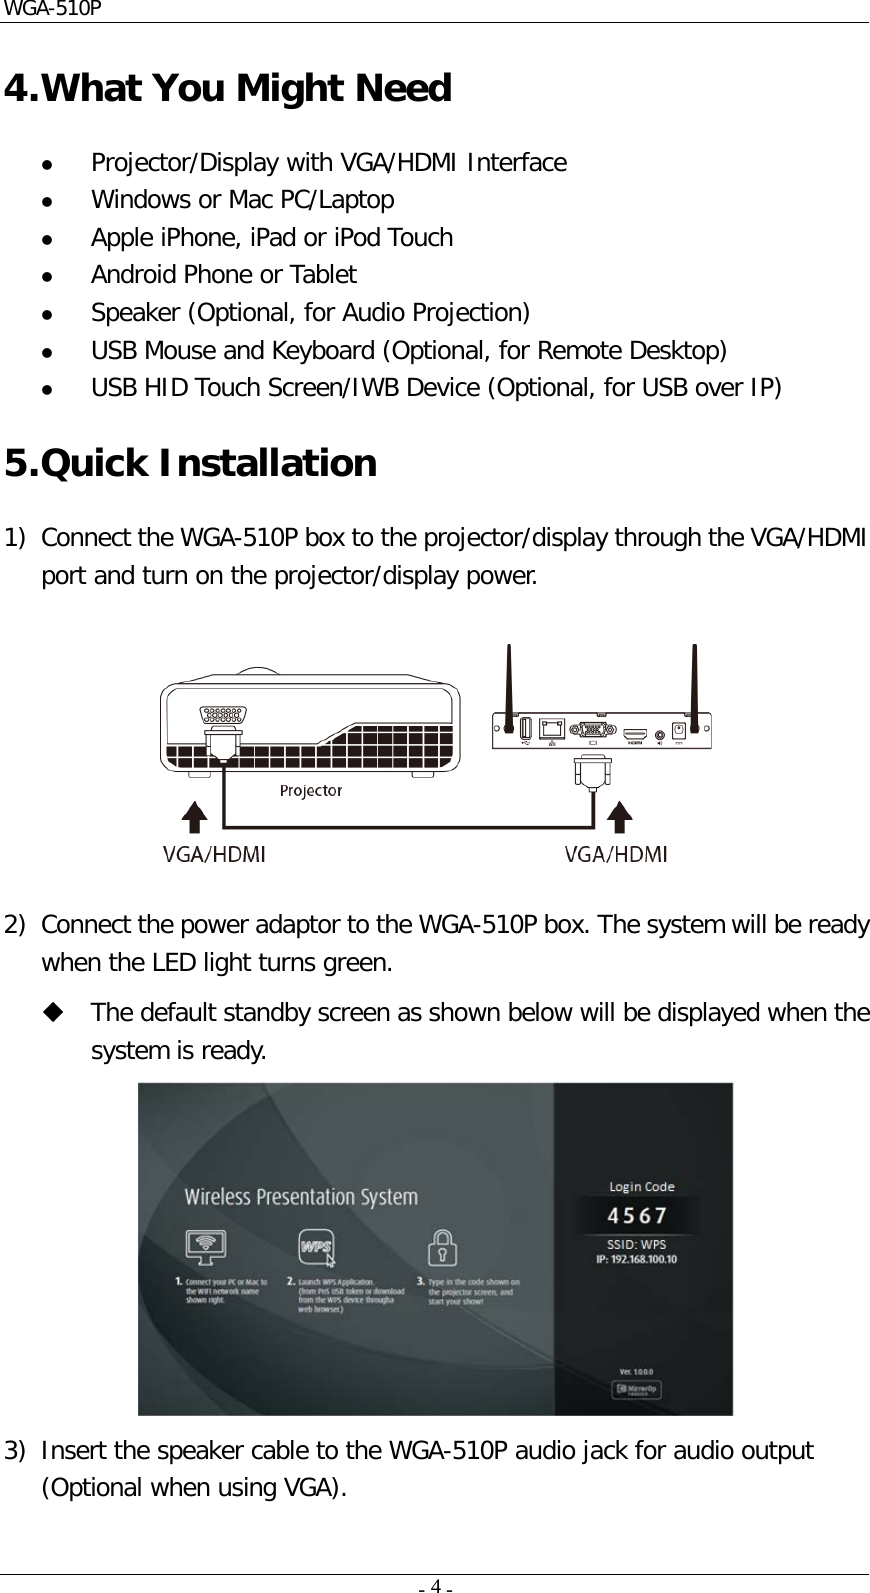 WGA-510P     -    -  4  4. What You Might Need  Projector/Display with VGA/HDMI Interface  Windows or Mac PC/Laptop  Apple iPhone, iPad or iPod Touch  Android Phone or Tablet   Speaker (Optional, for Audio Projection)  USB Mouse and Keyboard (Optional, for Remote Desktop)  USB HID Touch Screen/IWB Device (Optional, for USB over IP) 5. Quick Installation 1) Connect the WGA-510P box to the projector/display through the VGA/HDMI port and turn on the projector/display power.    2) Connect the power adaptor to the WGA-510P box. The system will be ready when the LED light turns green.  The default standby screen as shown below will be displayed when the system is ready.  3) Insert the speaker cable to the WGA-510P audio jack for audio output (Optional when using VGA). 